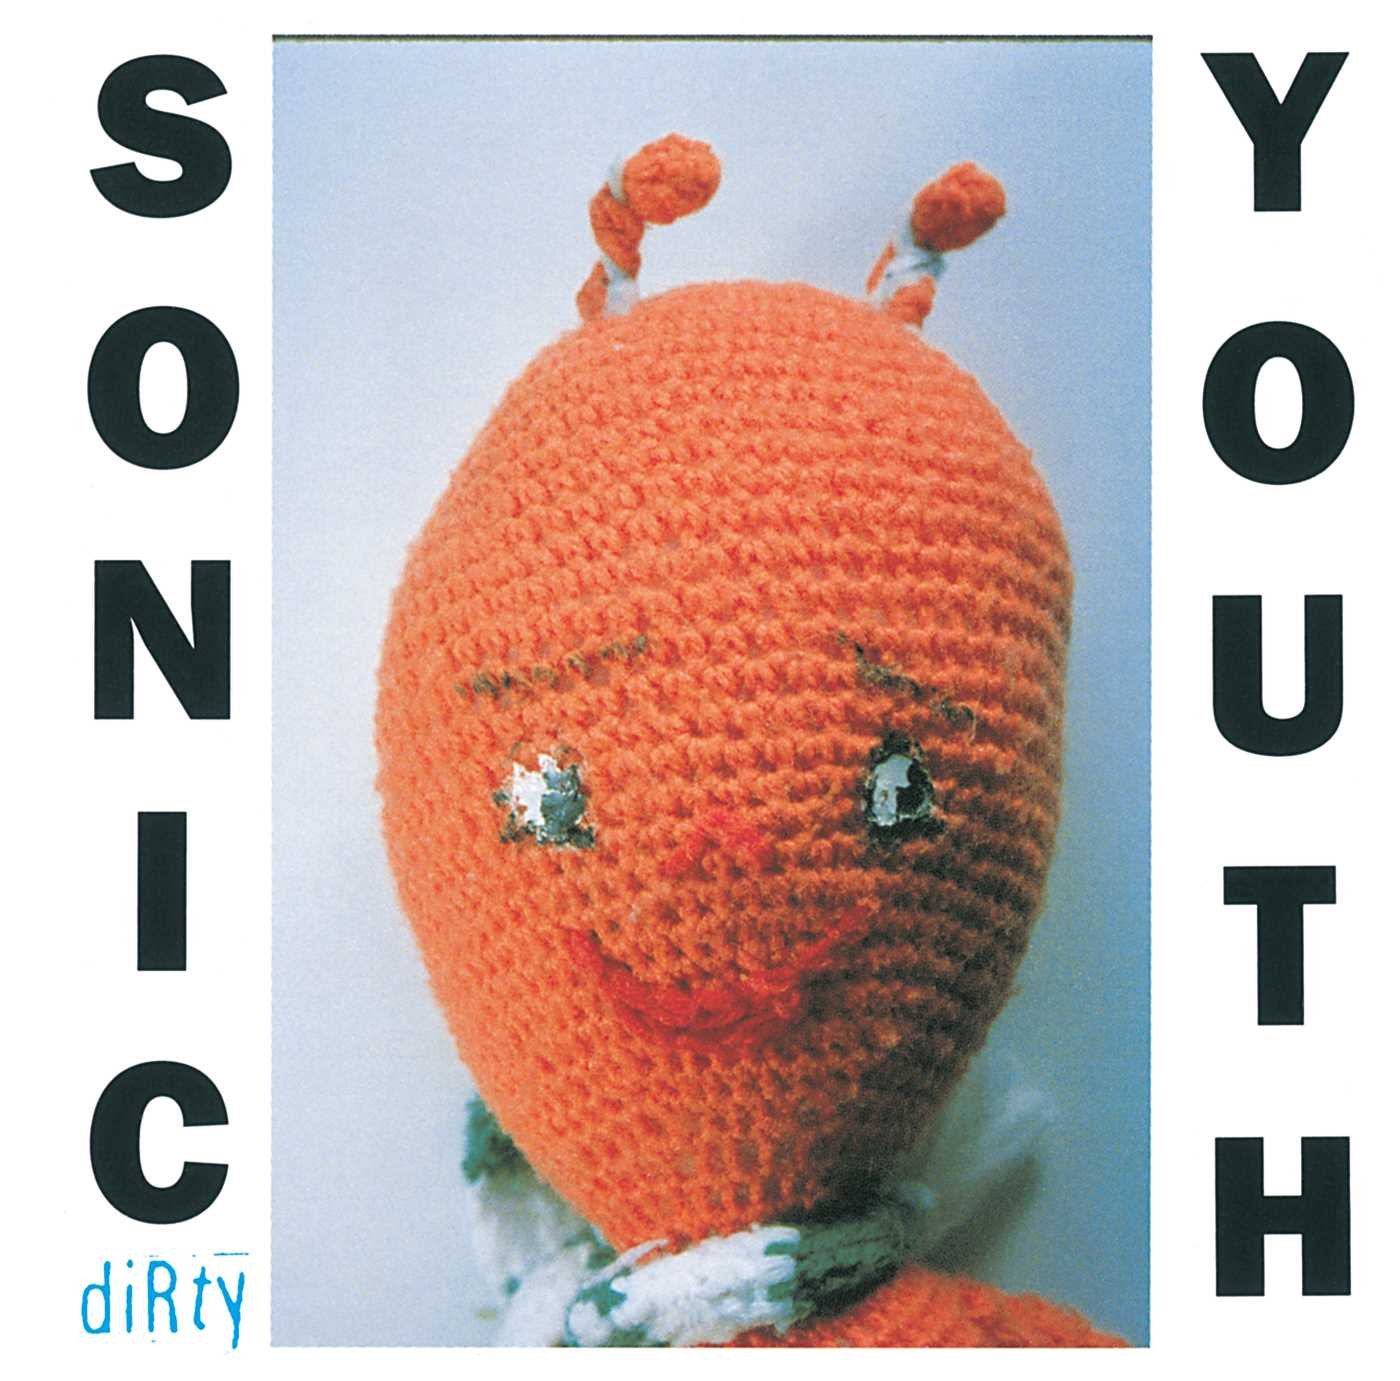 Sonic Youth "Dirty" 2LP